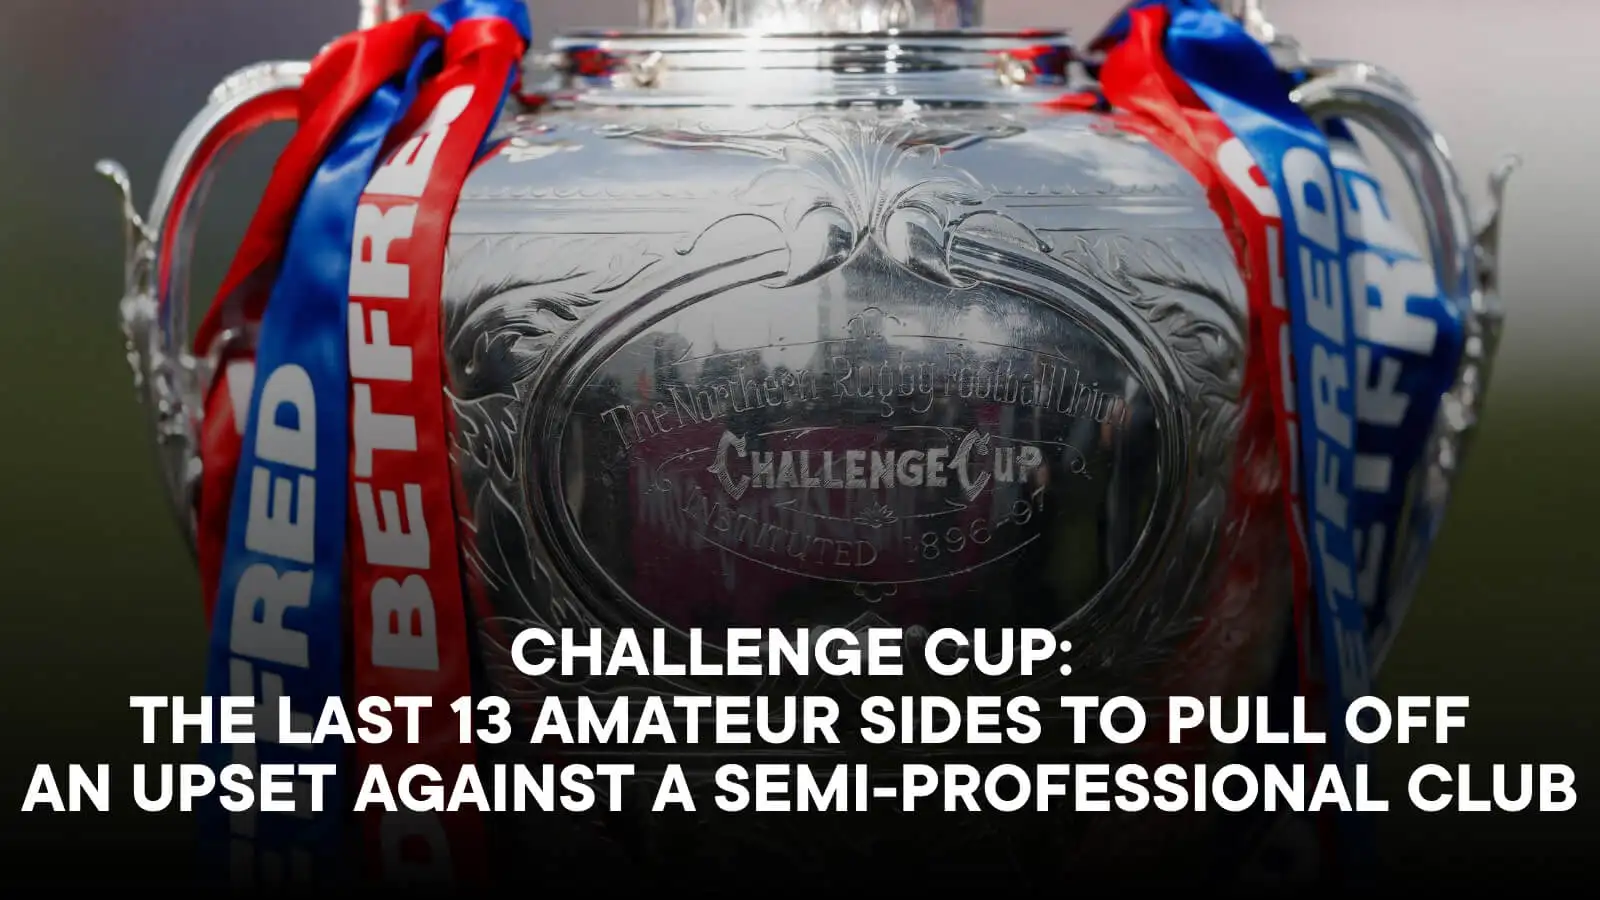 Challenge Cup trophy, text overlay - CHALLENGE CUP: THE LAST 13 AMATEUR SIDES TO PULL OFF AN UPSET AGAINST A SEMI-PROFESSIONAL CLUB'